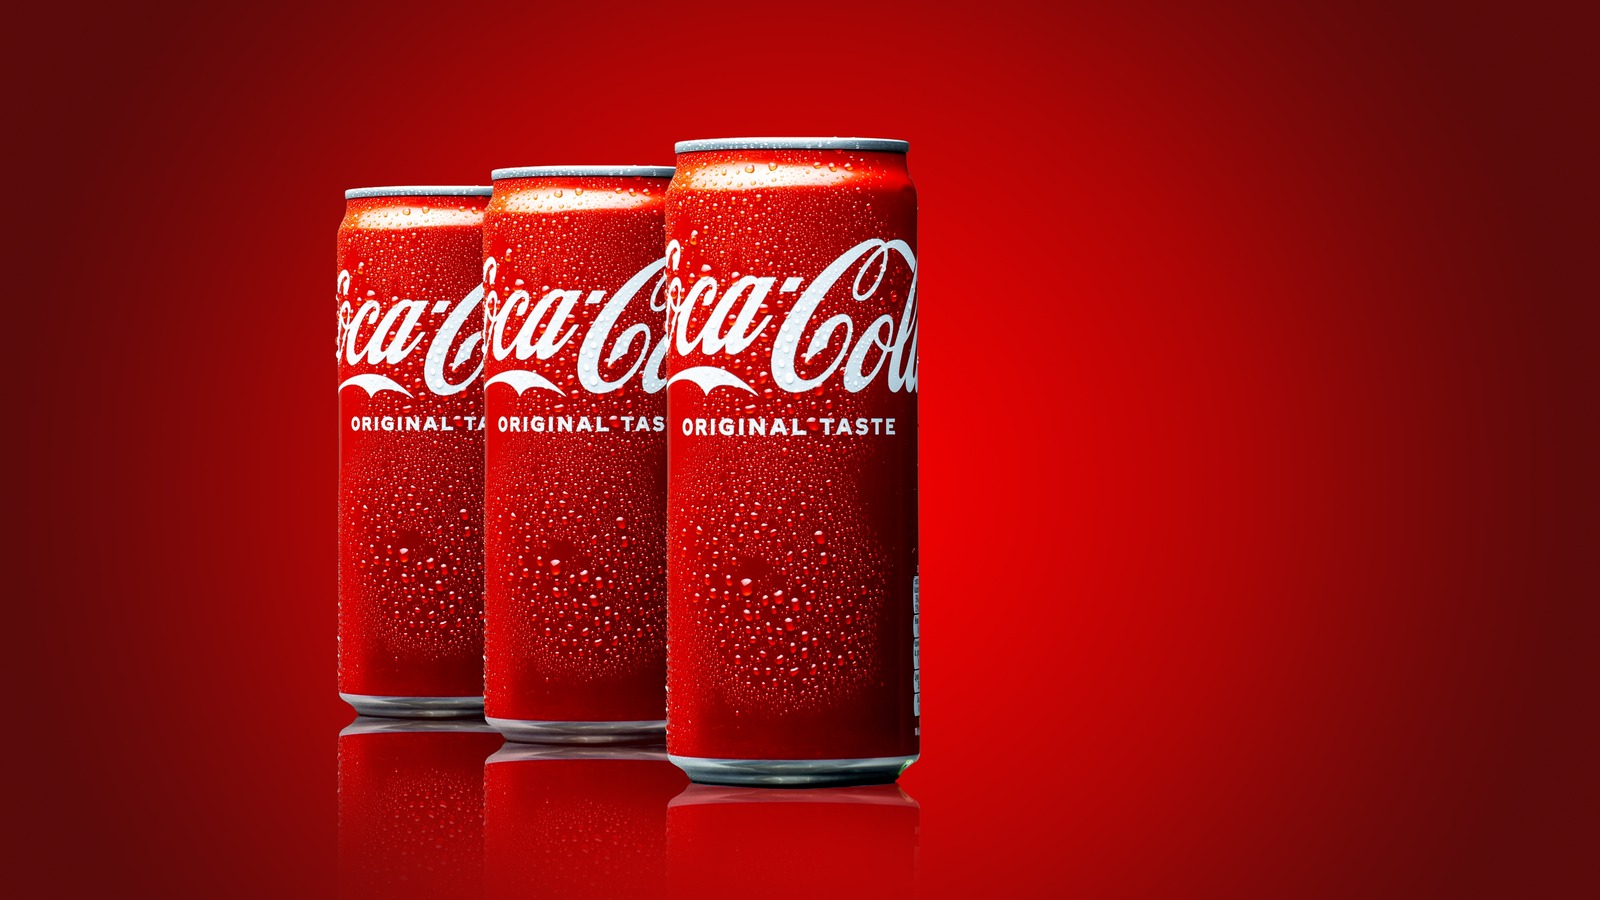 Coca-Cola Spiced: Coke's 1st new flavor in 3 years is hitting shelves